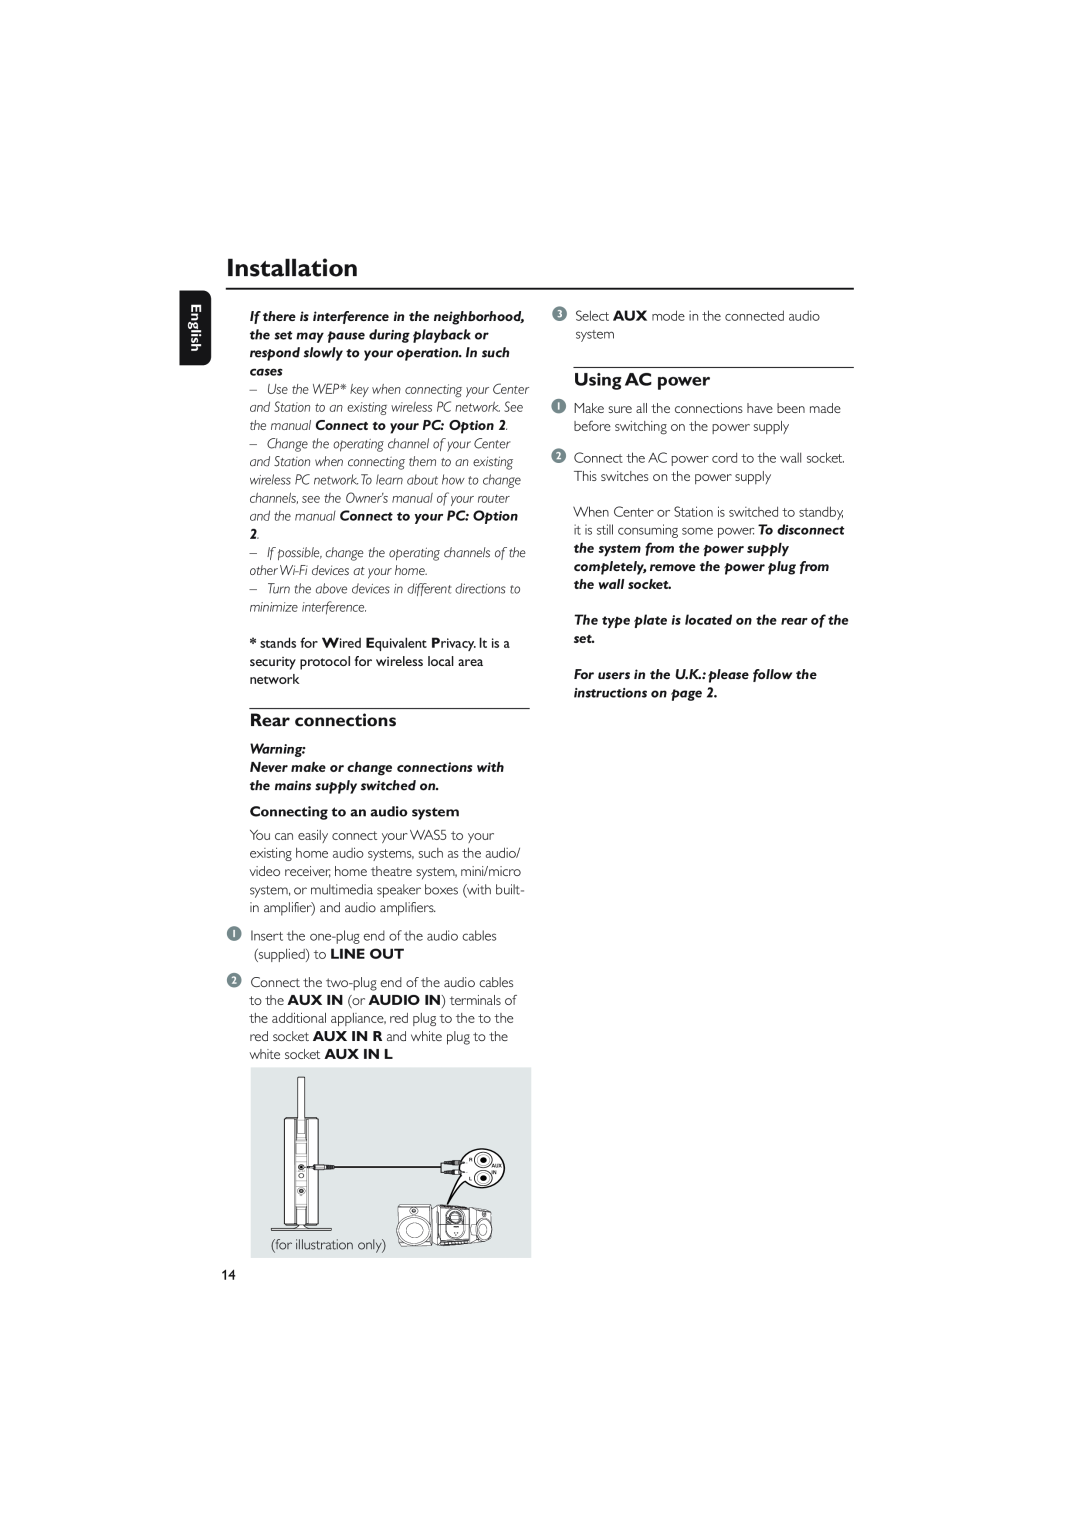 Philips WAS5 user manual Using AC power, Rear connections, Installation, English, Connecting to an audio system 